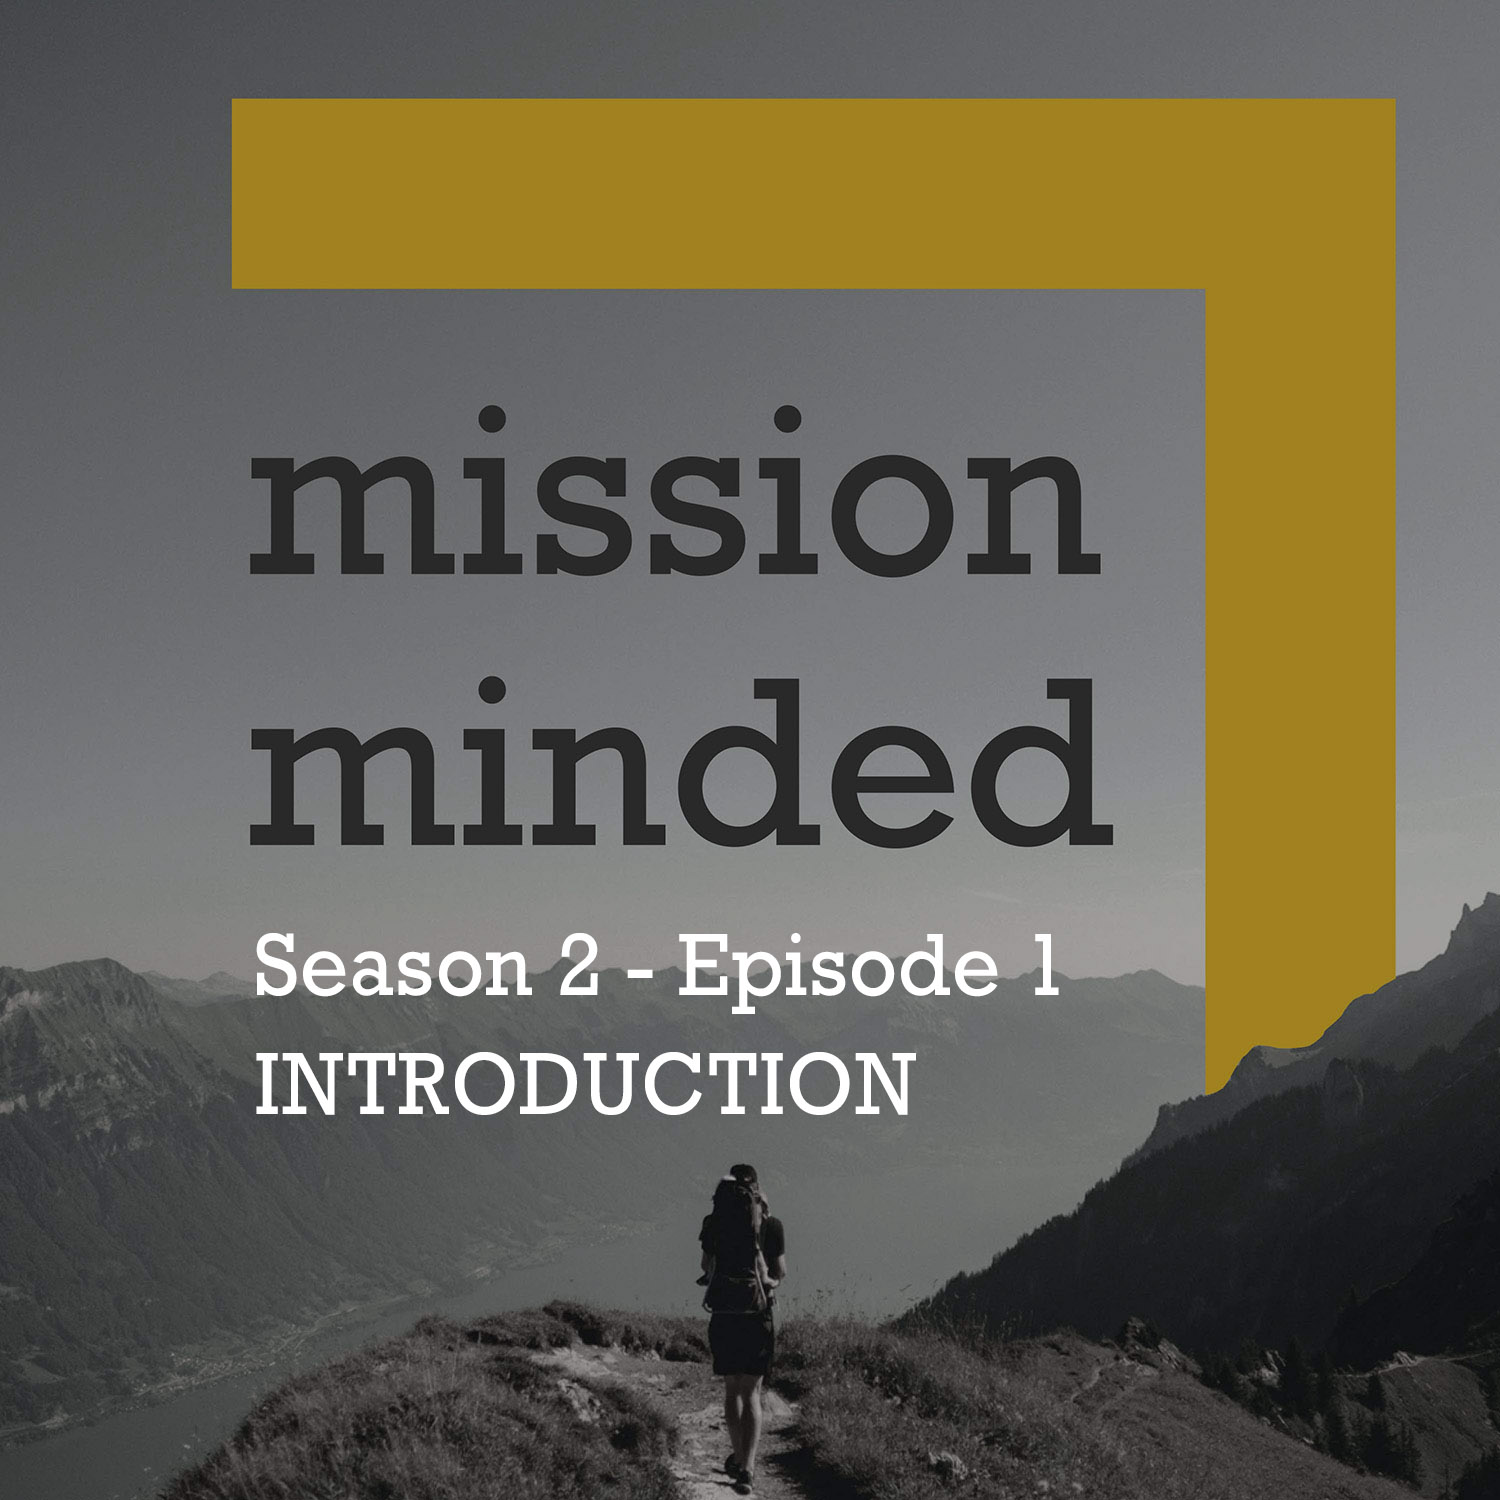 Introduction to Season 2 of Mission Minded